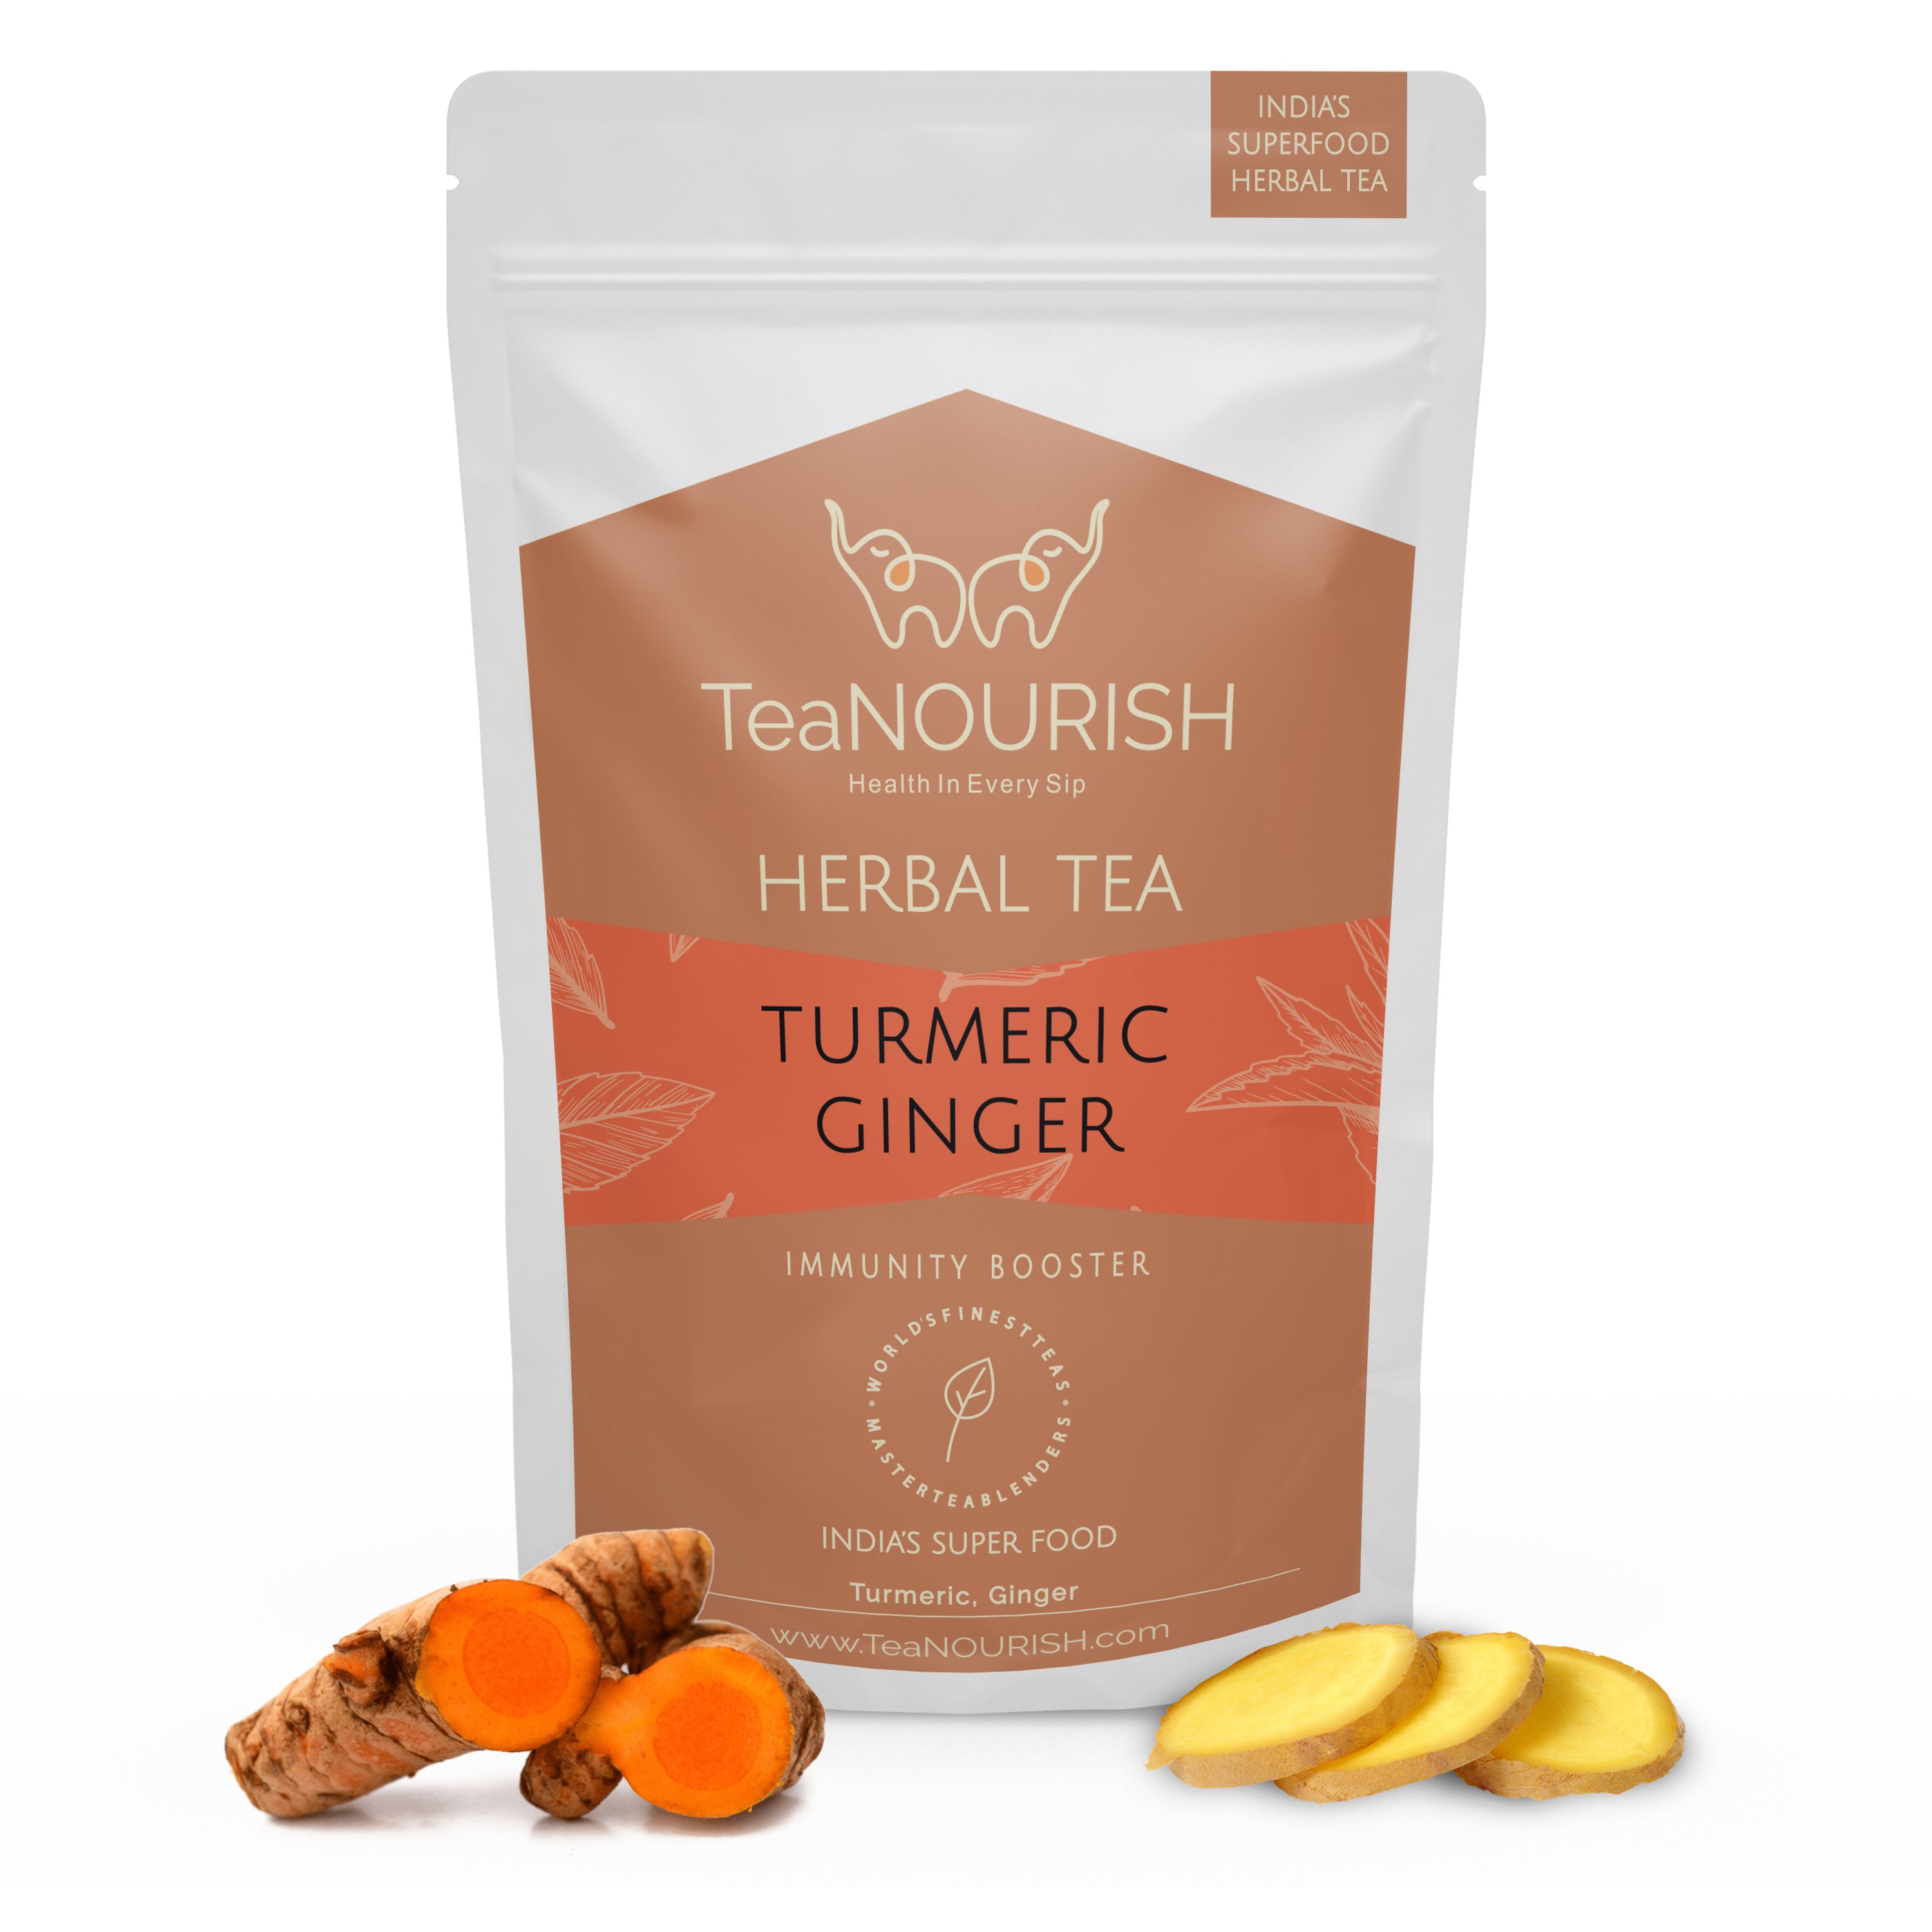 Turmeric Ginger Herbal Tea Product Picture